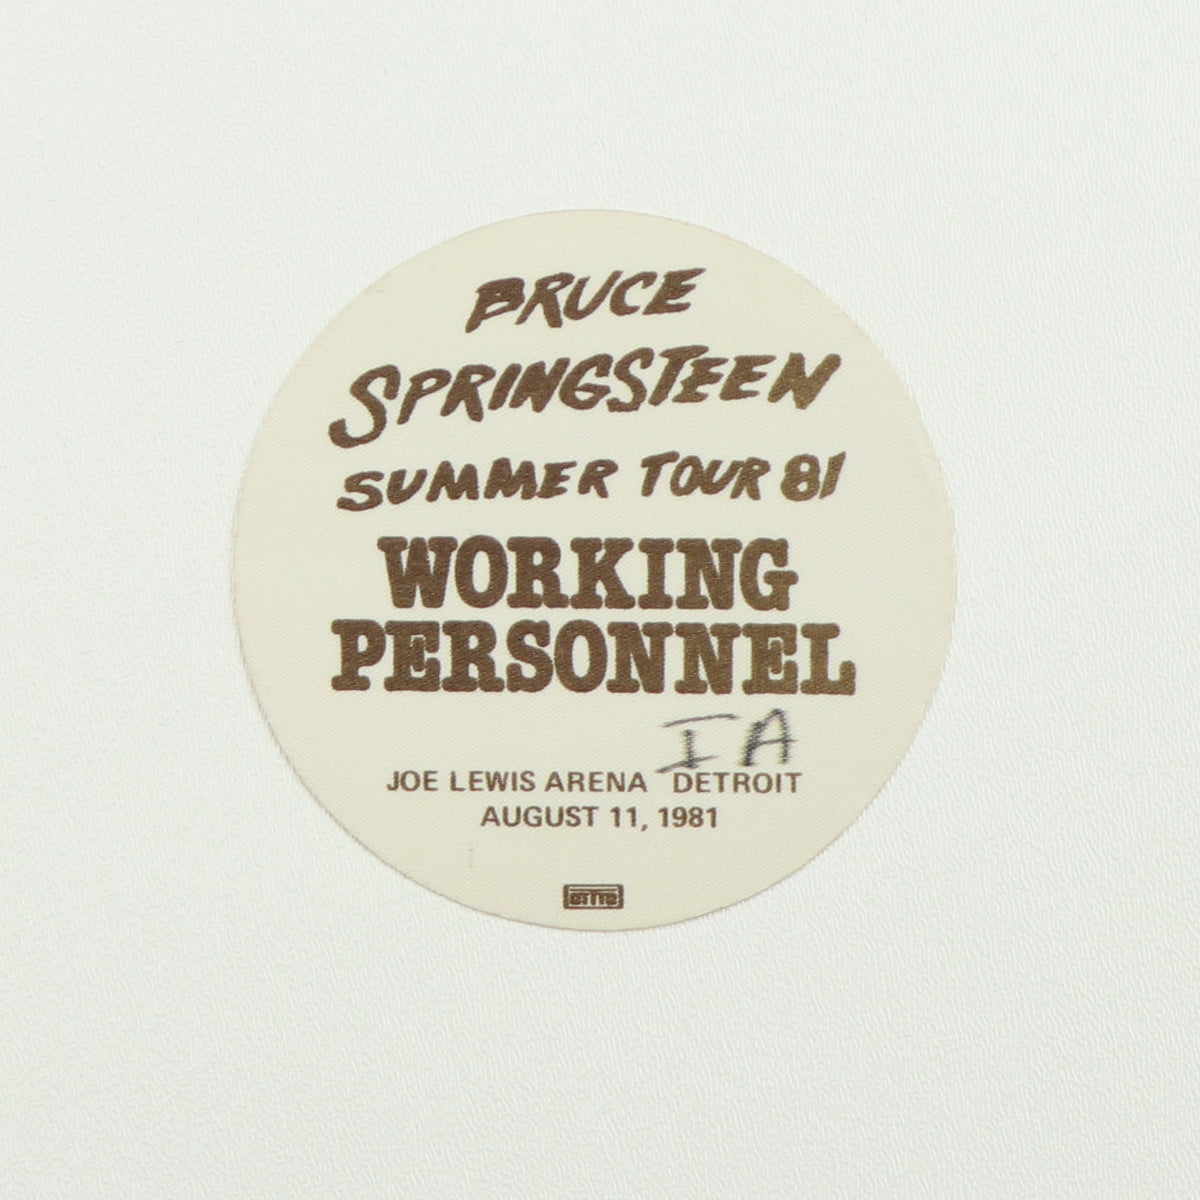 1981 Bruce Springsteen Summer Tour Working Personnel Backstage Pass